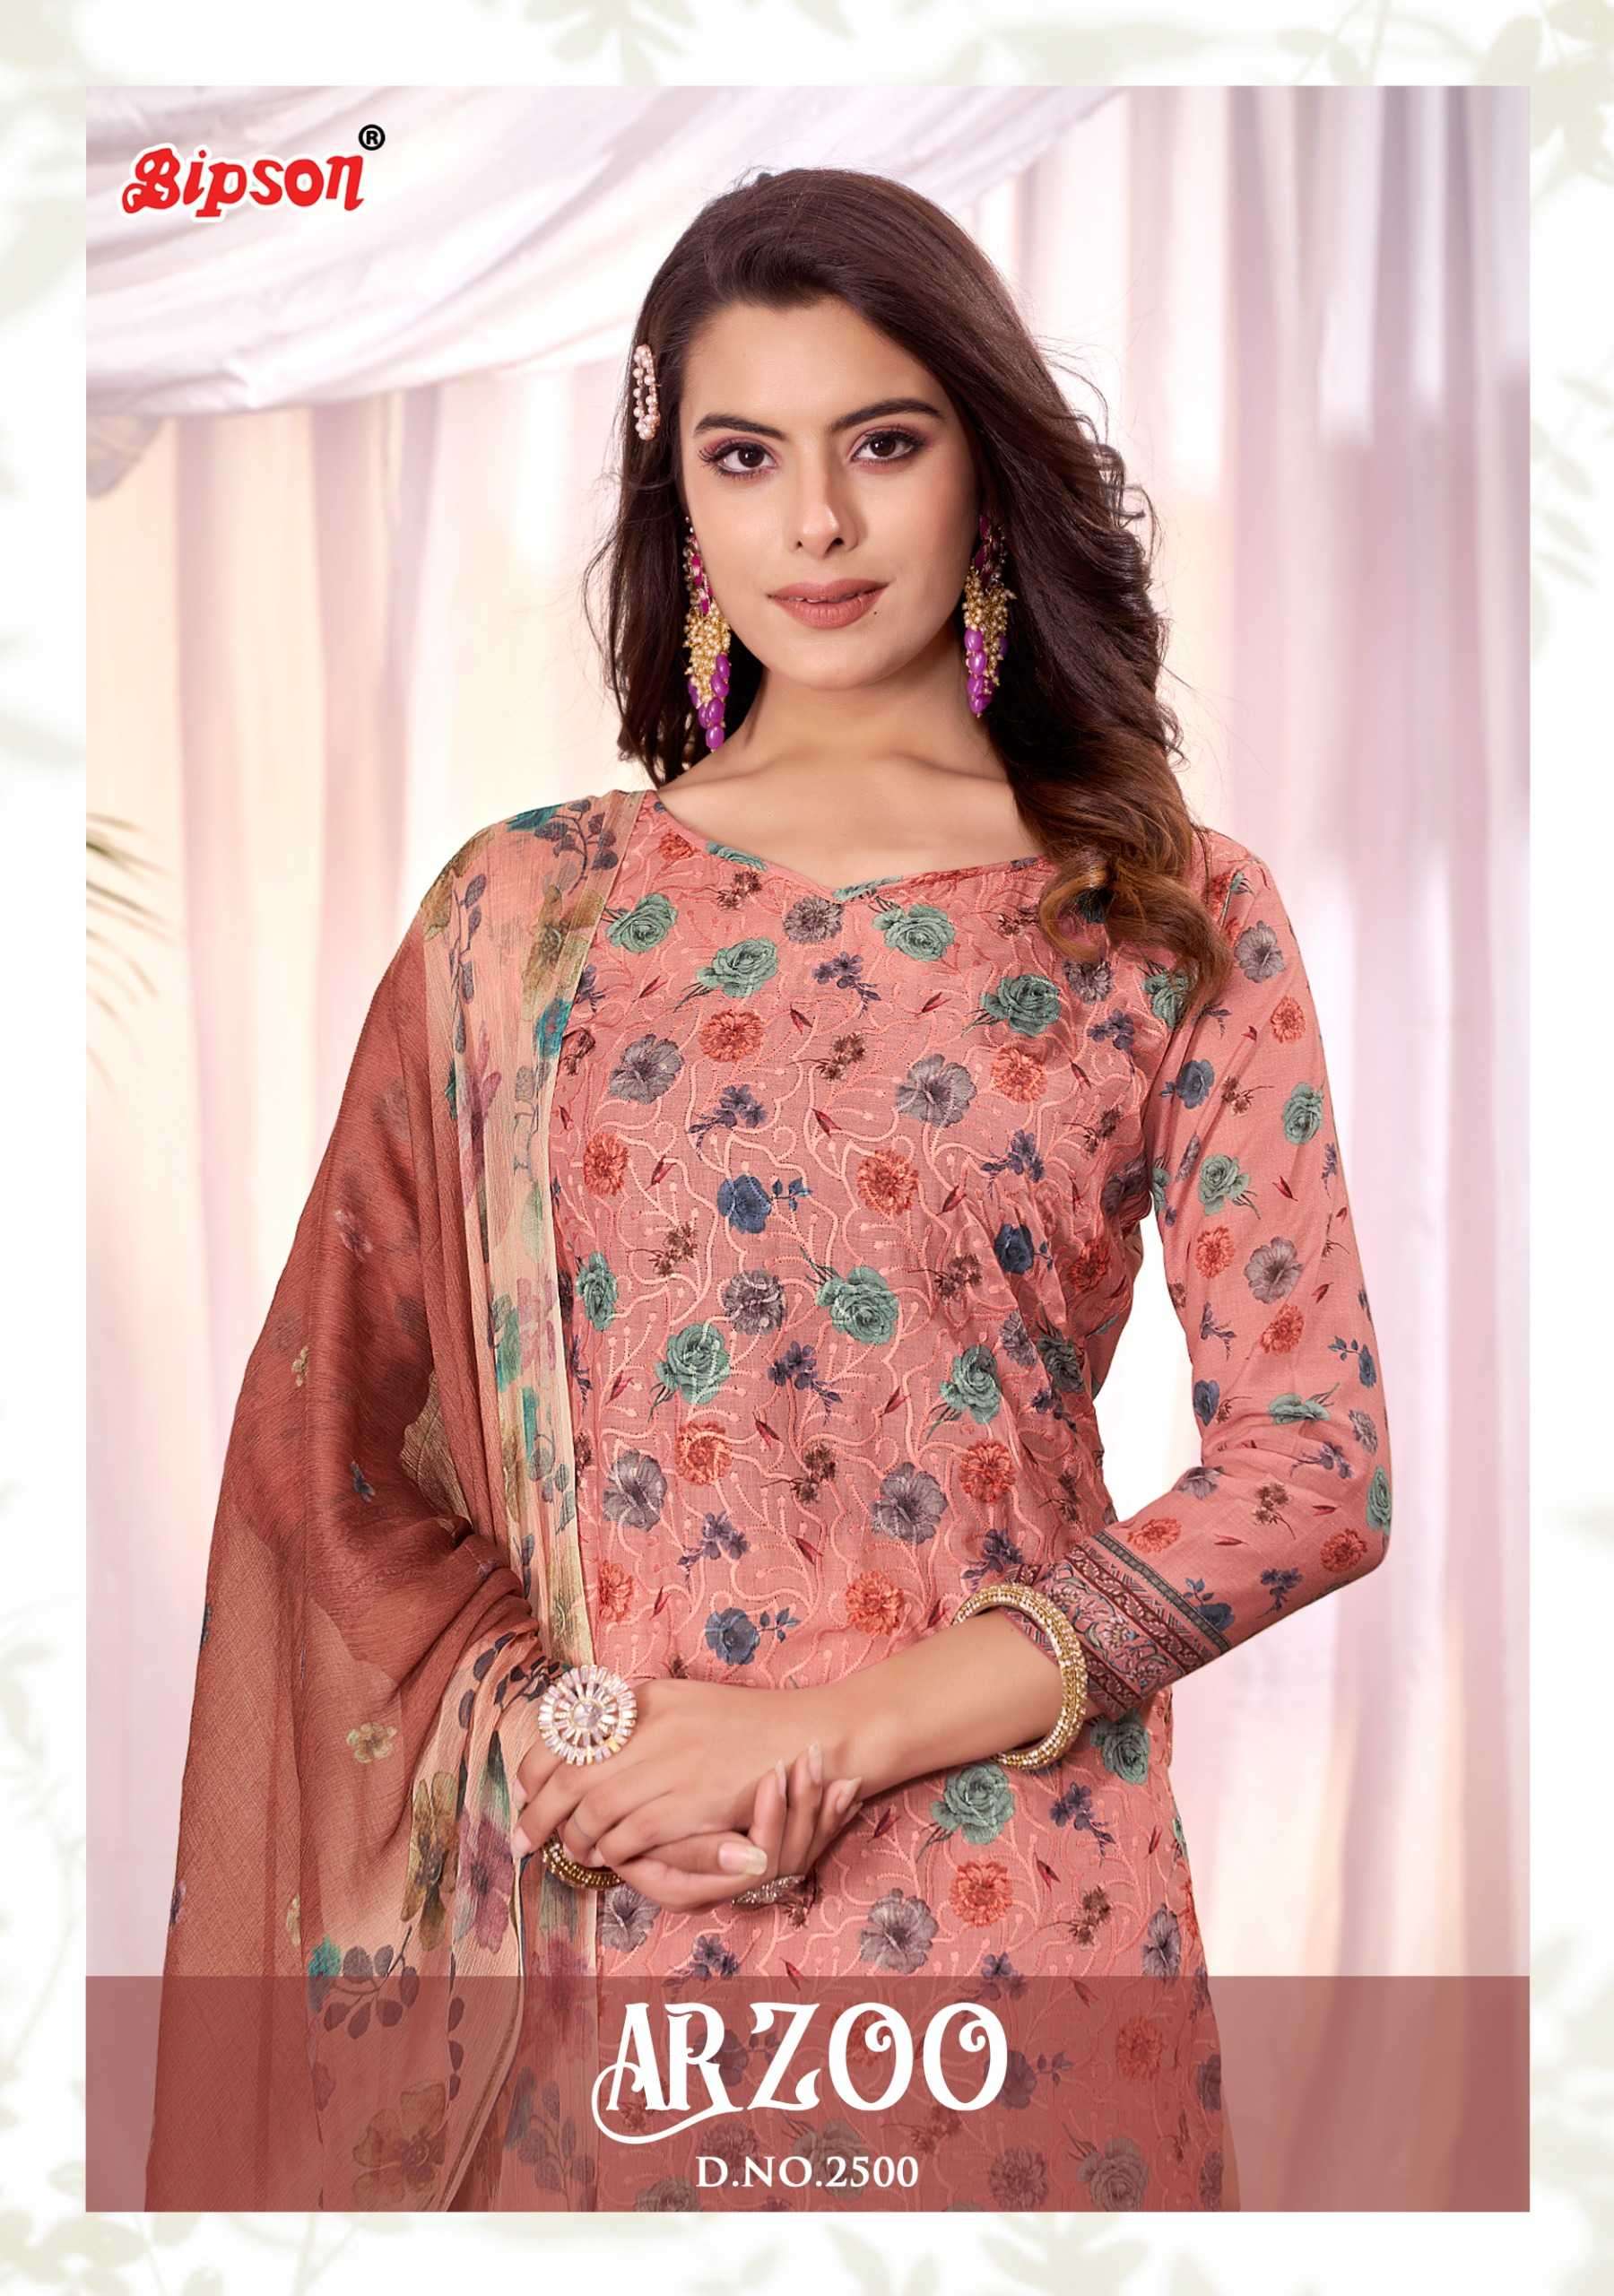 bipson aarzoo 2500 Pure COTTON printed suit 